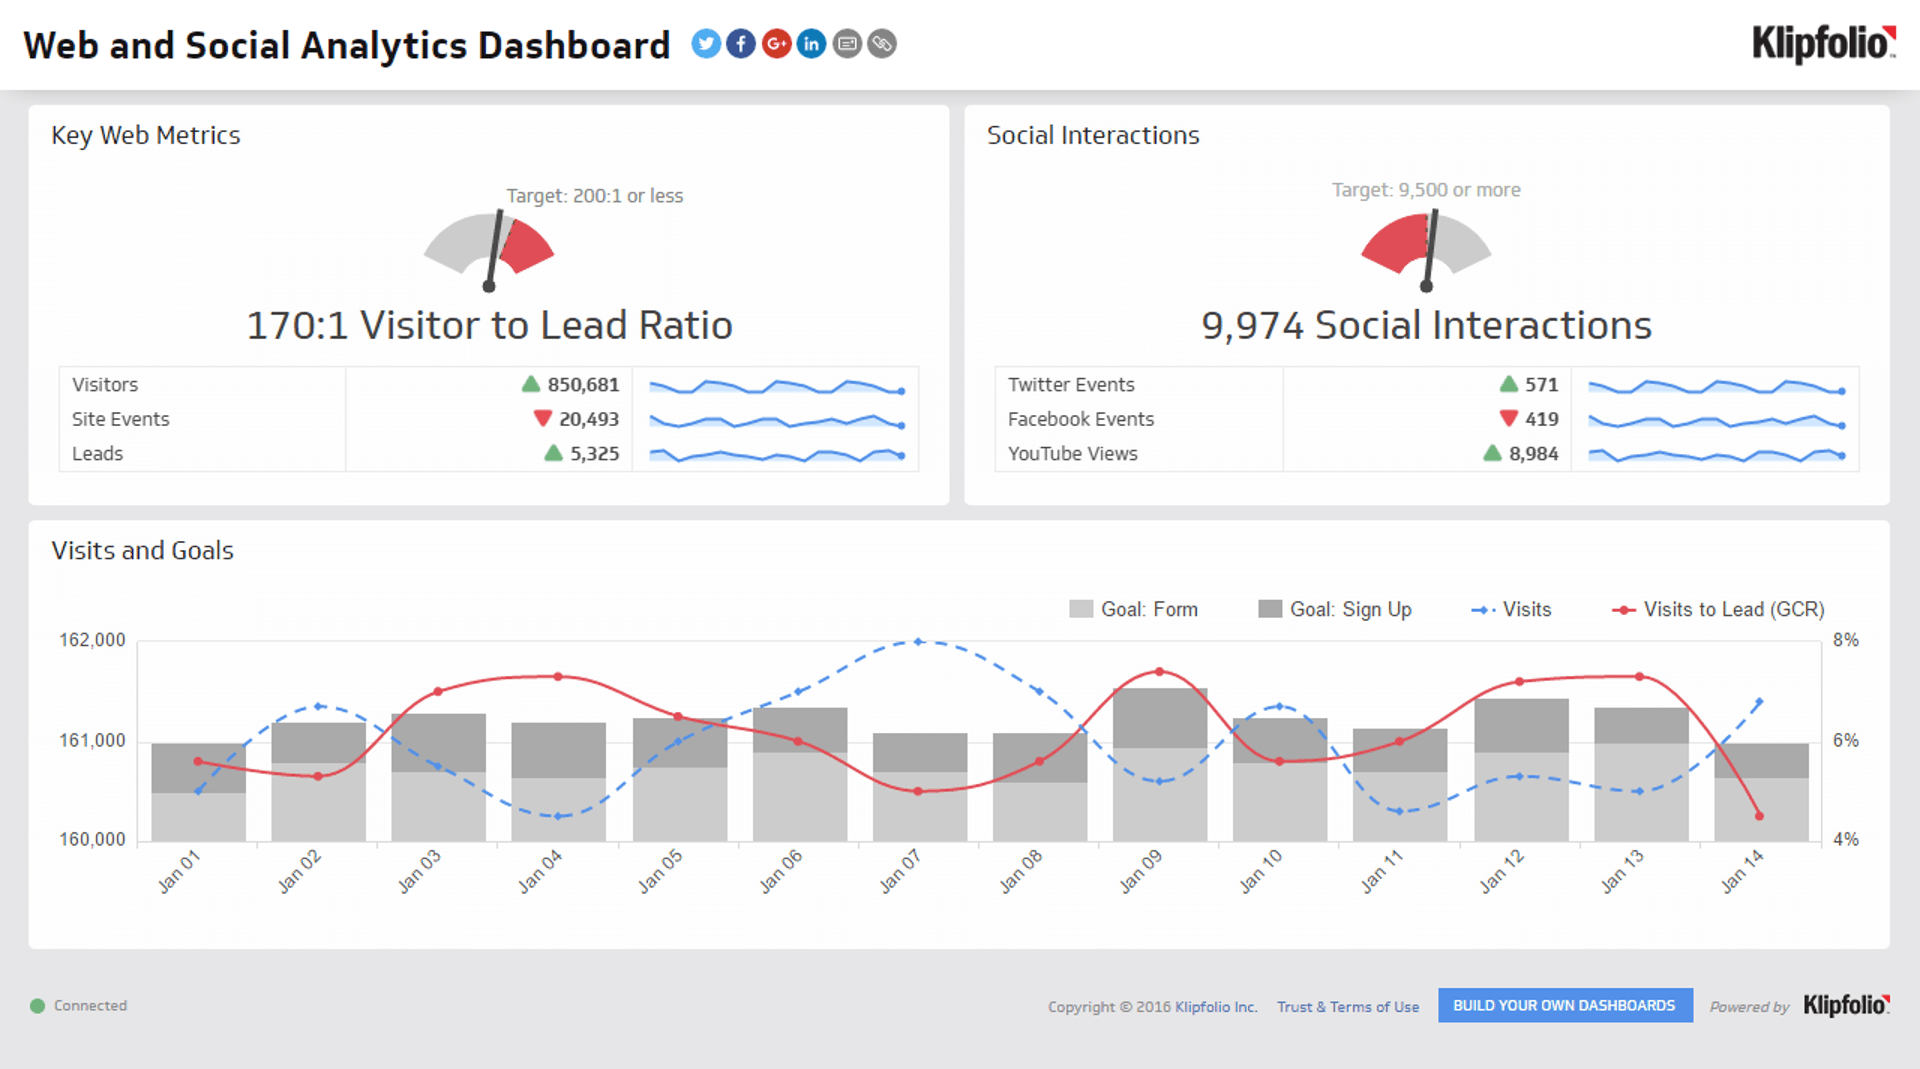 Related Dashboard Examples - Web and Social Analytics Dashboard